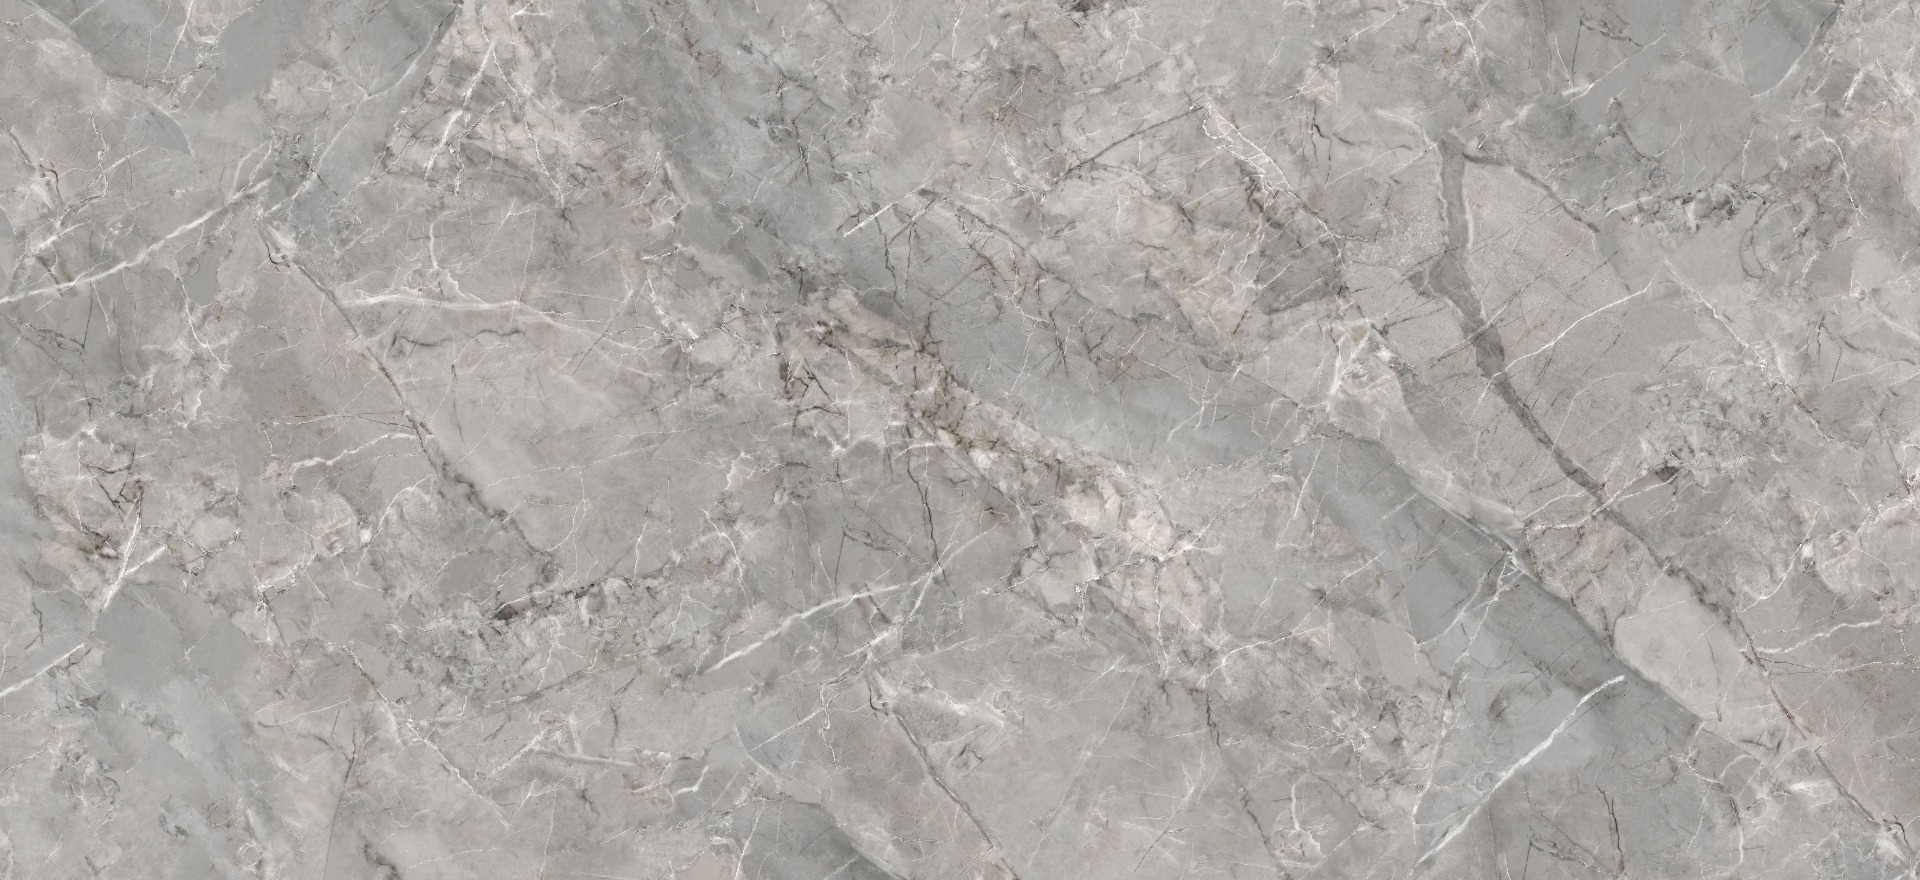 Natural White Marble Texture For Skin Tiles Wallpaper Luxurious Background  Stone Ceramic Wall Design Stock Photo  Download Image Now  iStock